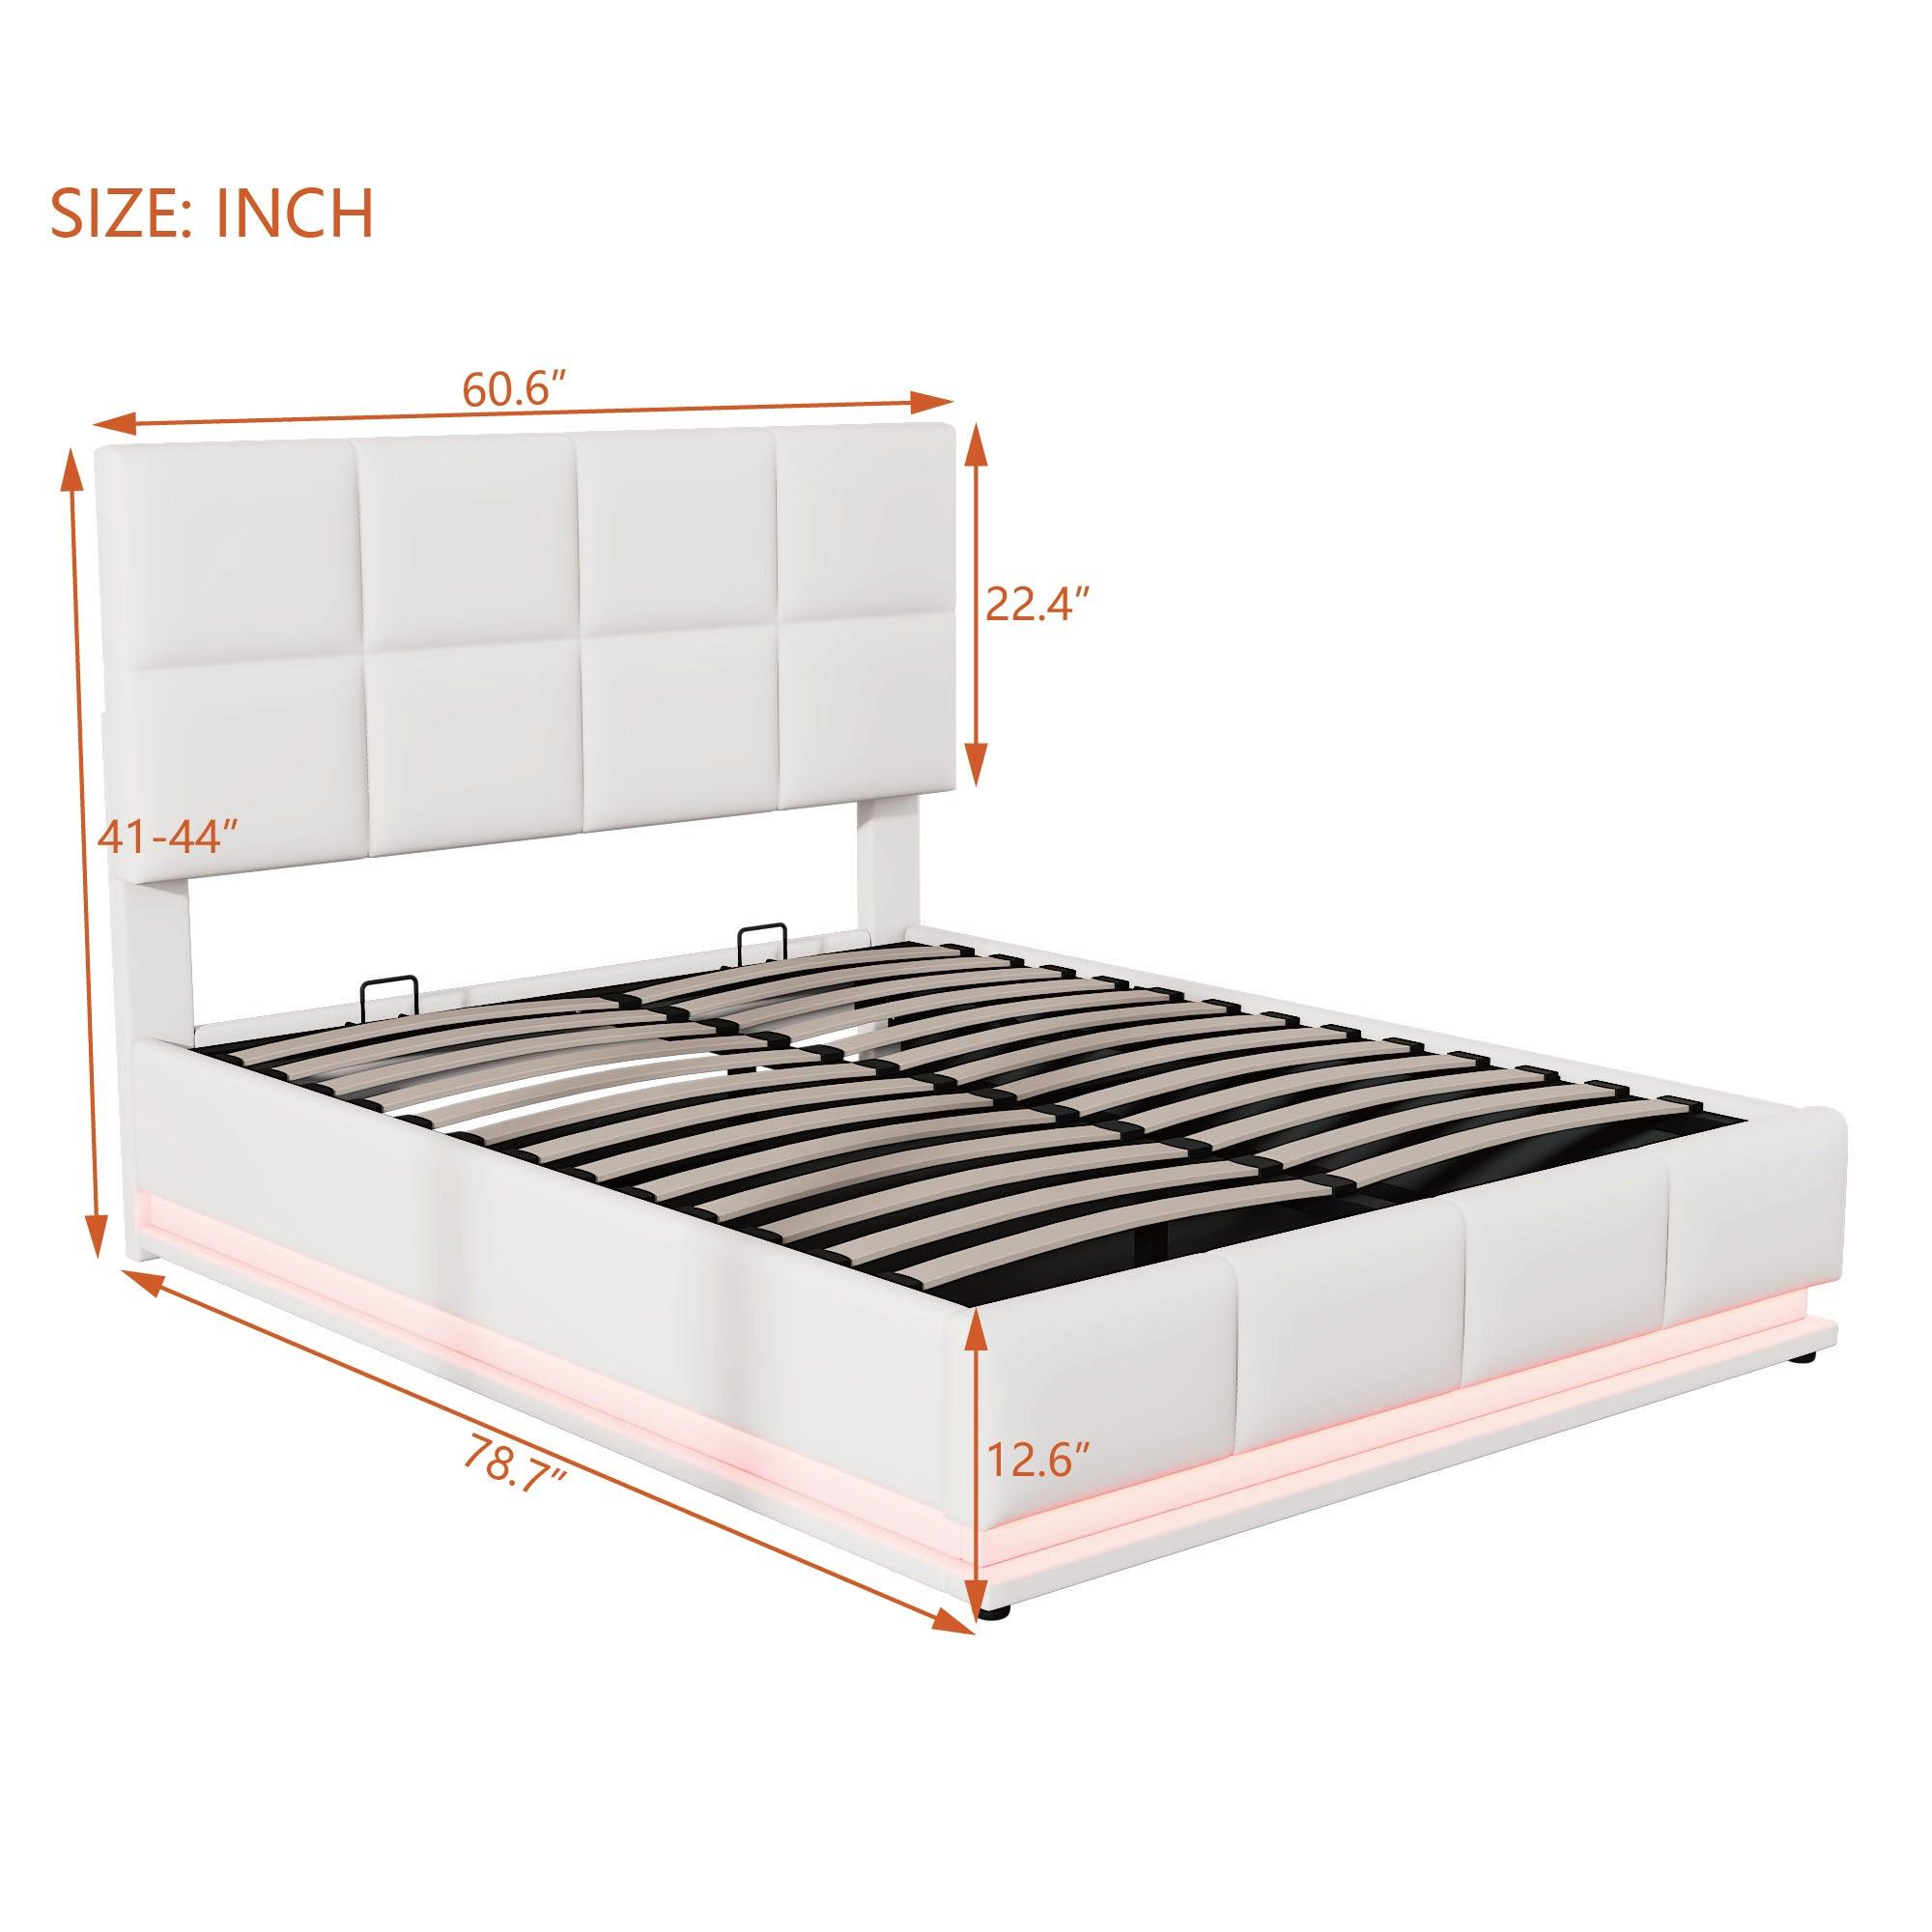 Full Size Tufted Upholstered Platform Bed with Hydraulic Storage System, PU Storage Bed with LED Lights and USB charger, White